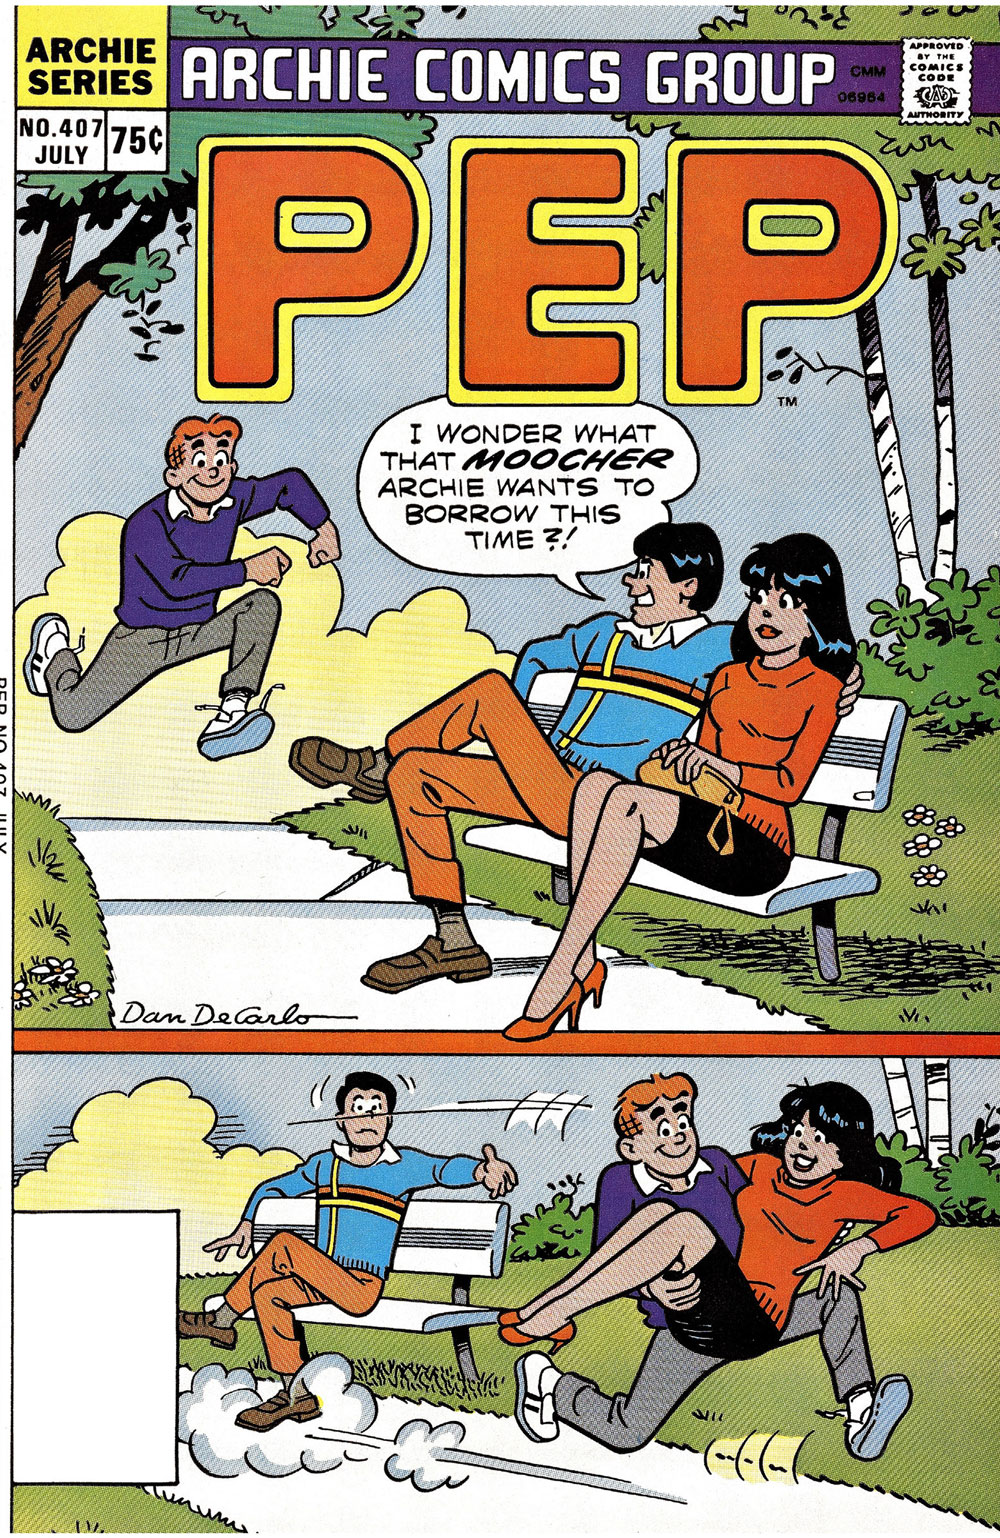 Archie runs through the park past Reggie and Veronica who are sitting on a bench. Reggie wonders what Archie wants to borrow from him this time. In the next panel, Archie is running away with Veronica in his arms and Reggie looks stunned.